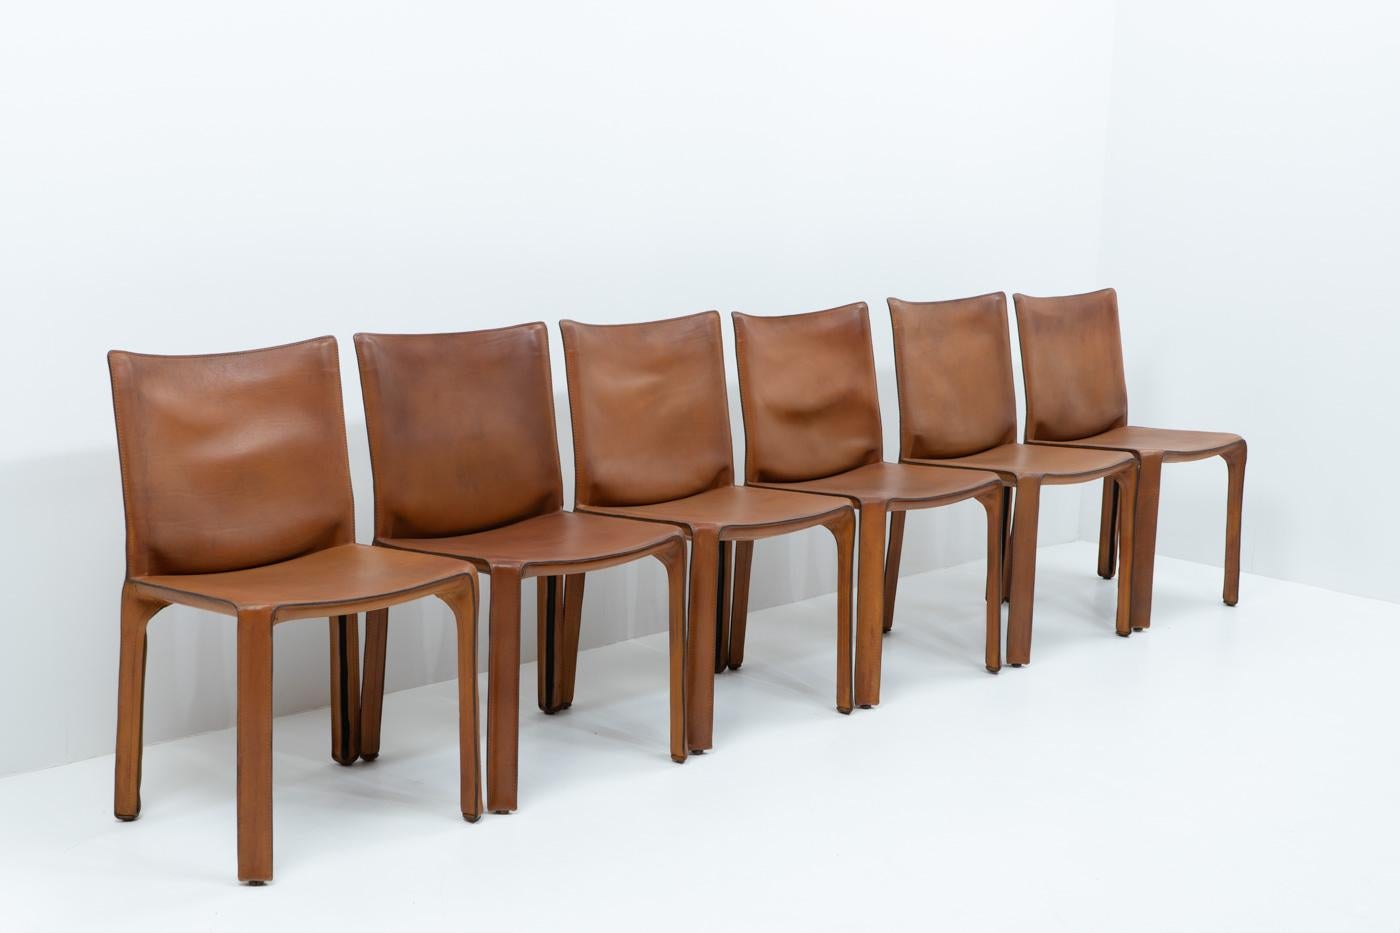 Late 20th Century Italian Design Classic Cab 412 Chairs by Mario Bellini for Cassina, Set of Six